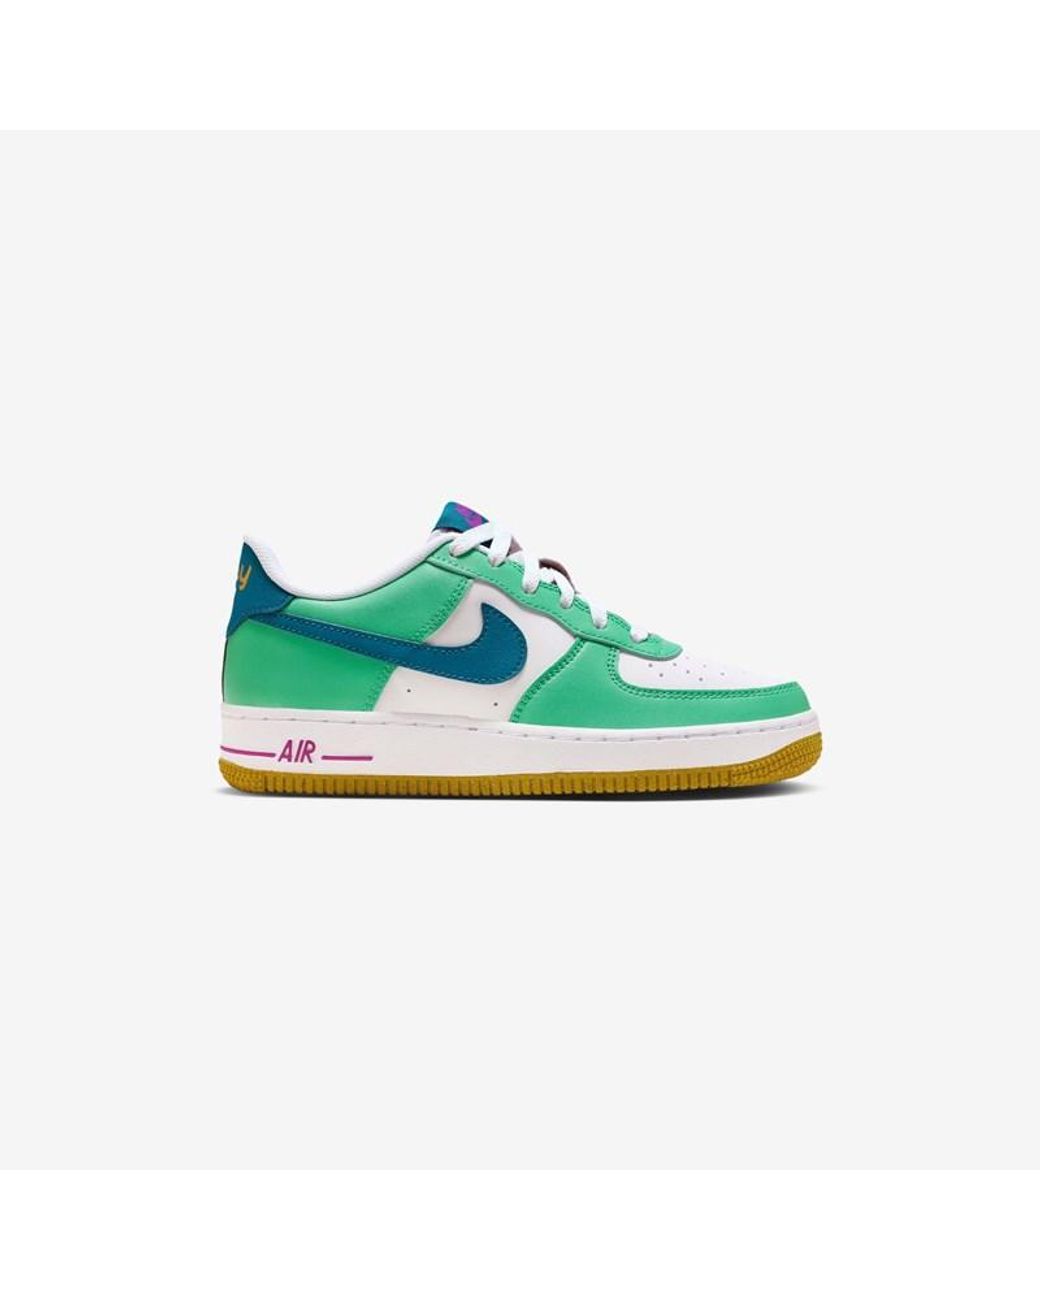 Nike Air Force 1 ' 07 LV8 3 Removable Swoosh - Stadium Goods